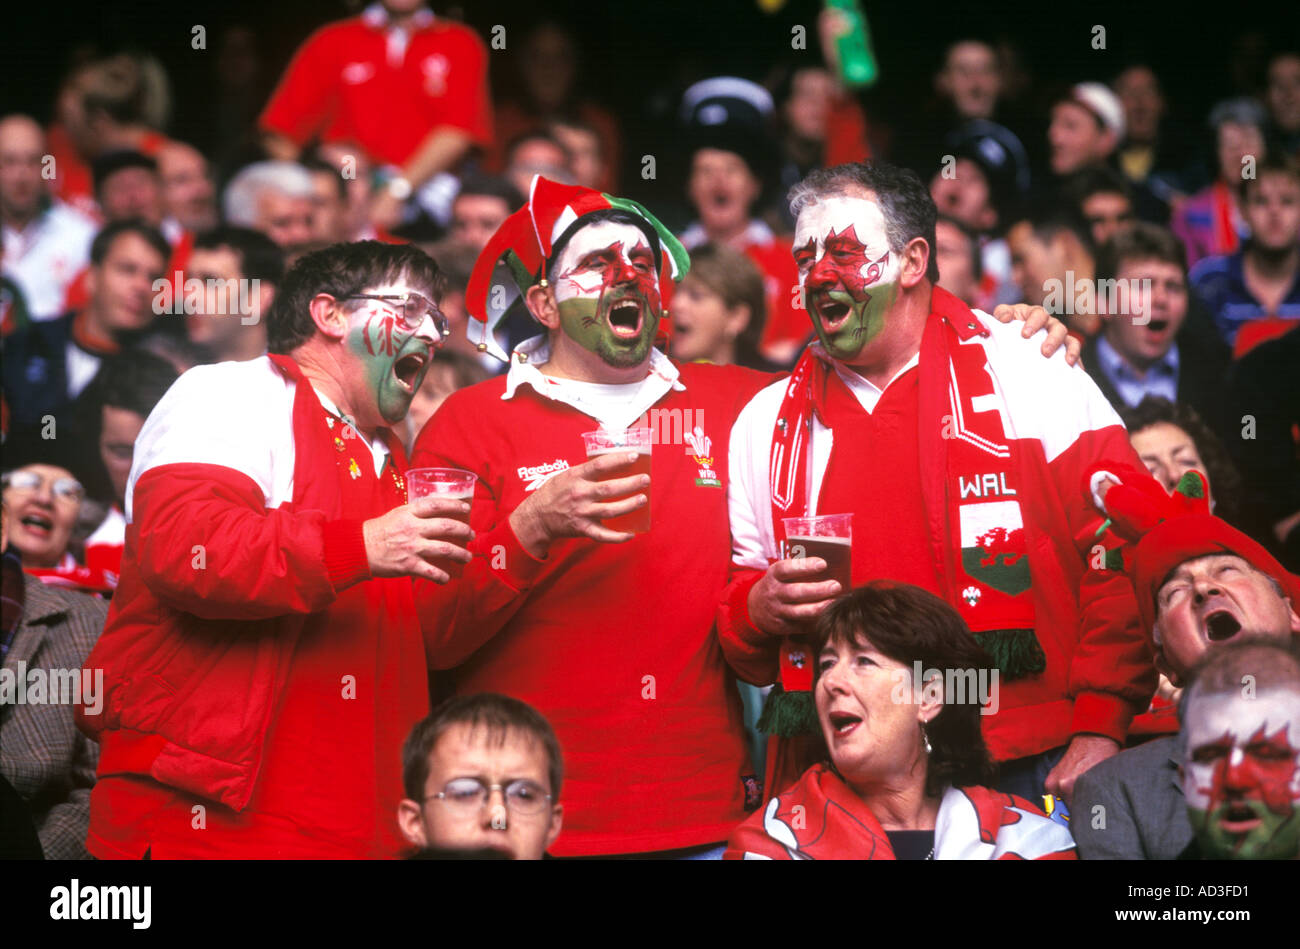 Welsh Rugby Fans Millenium Centre Cardiff City Centre South Glamorgan Wales UK 23151SB Stockfoto